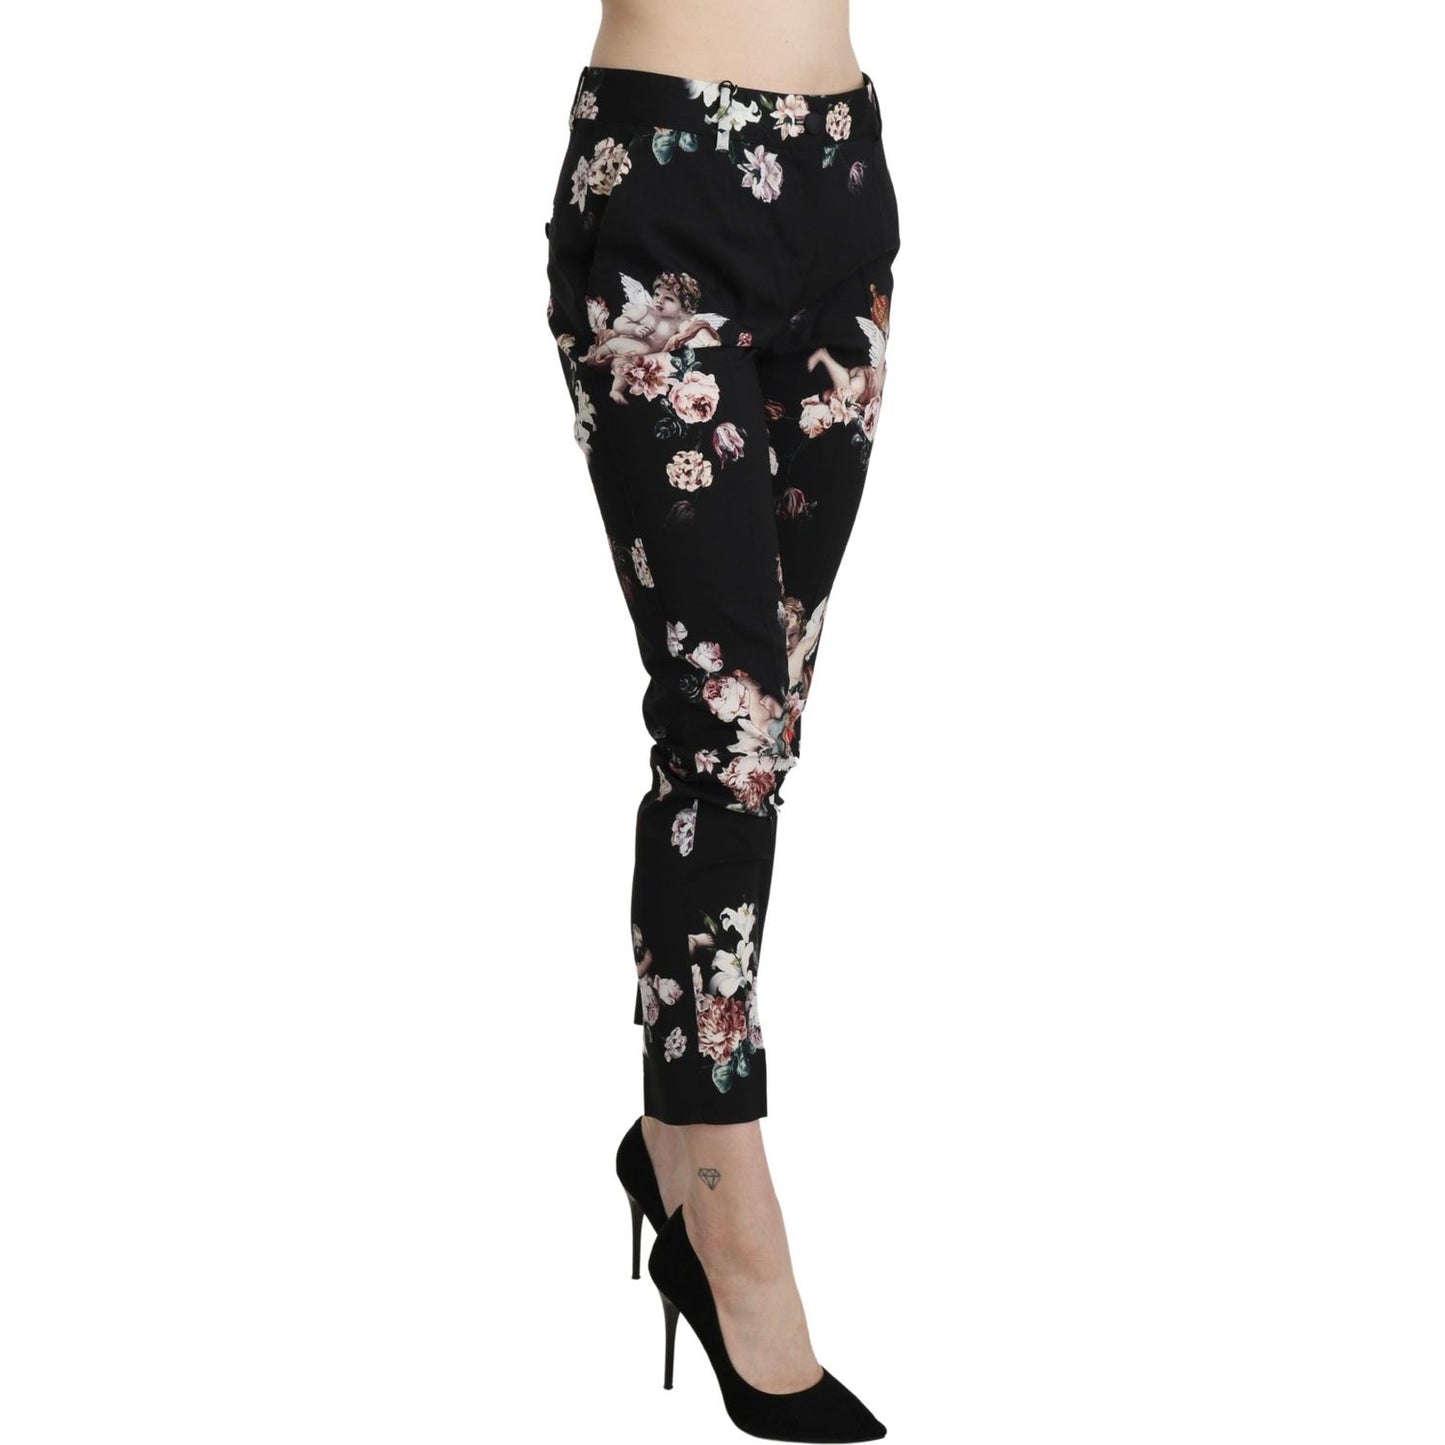 Dolce & Gabbana Elegant High Waist Cropped Trousers black-angel-floral-cropped-trouser-wool-pants Jeans & Pants IMG_0964-scaled-40a05506-73b.jpg